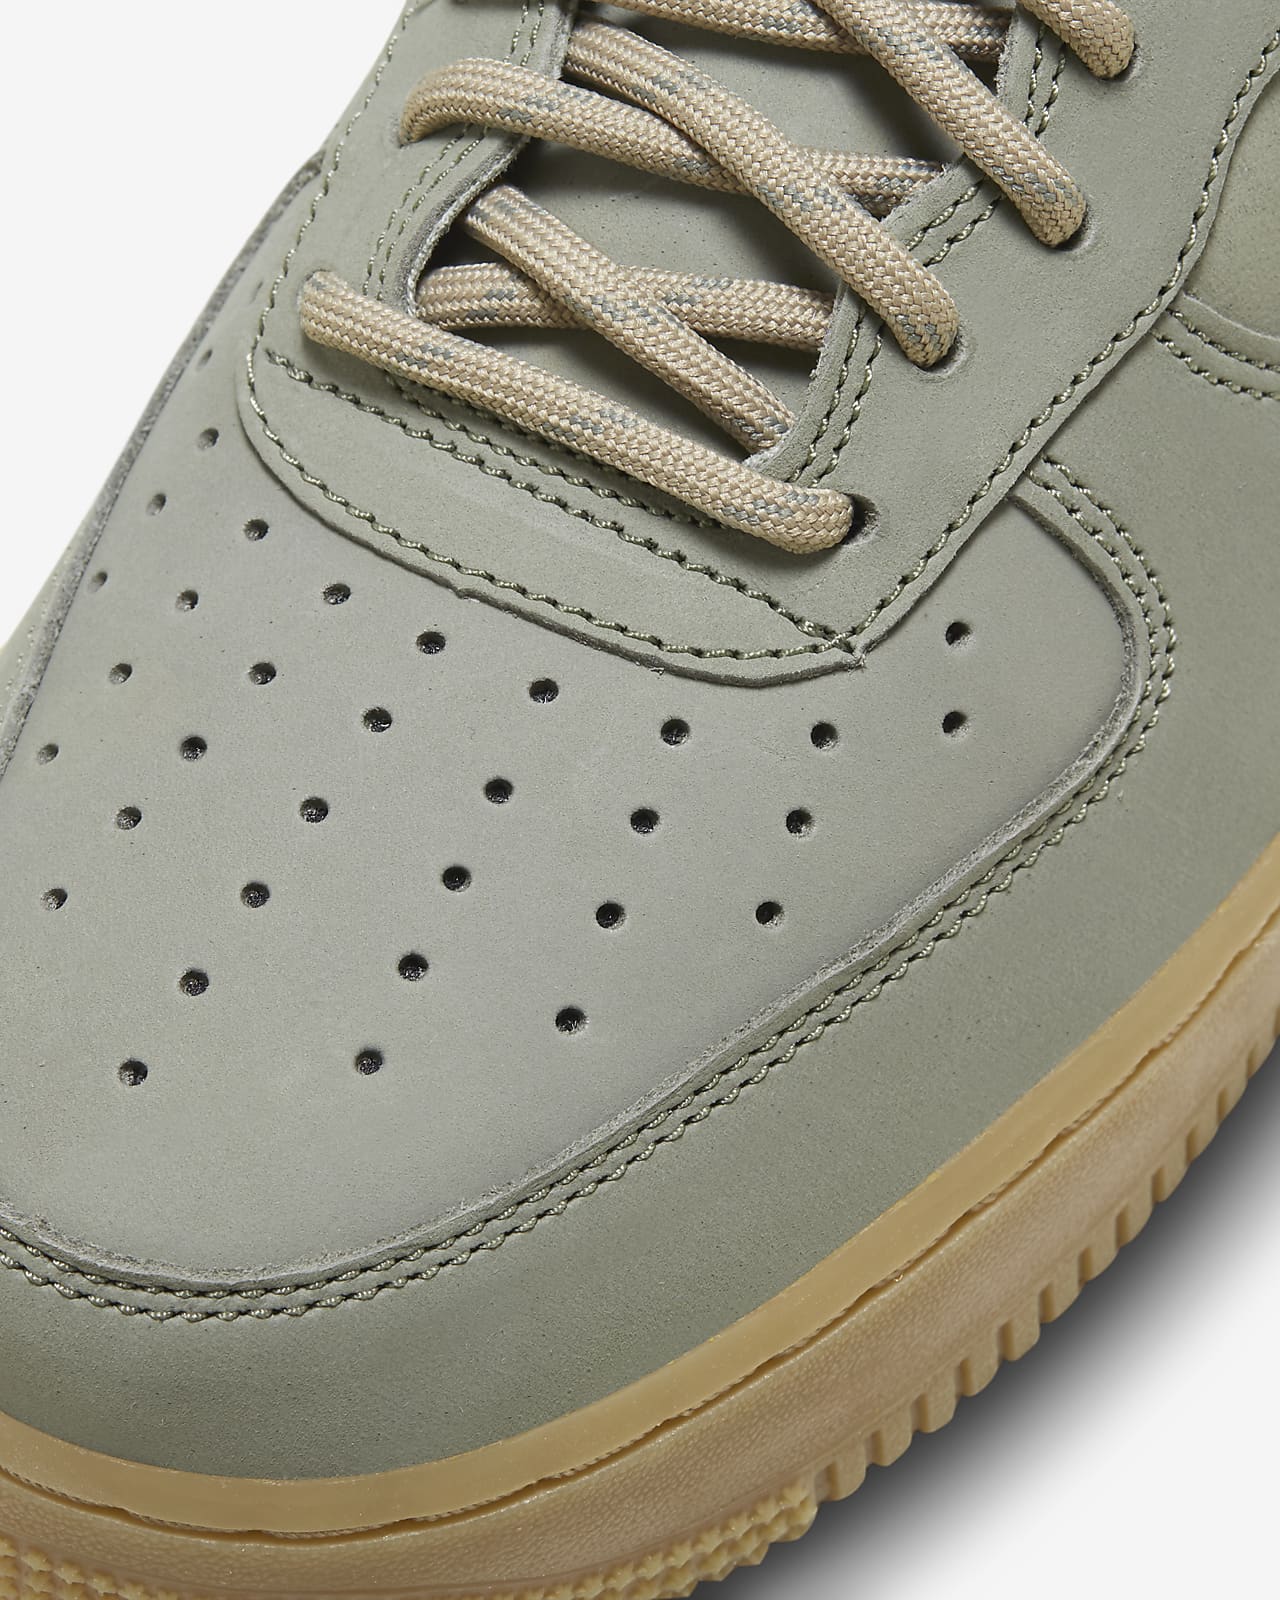 Nike Air Force 1 '07 Men's Shoes.